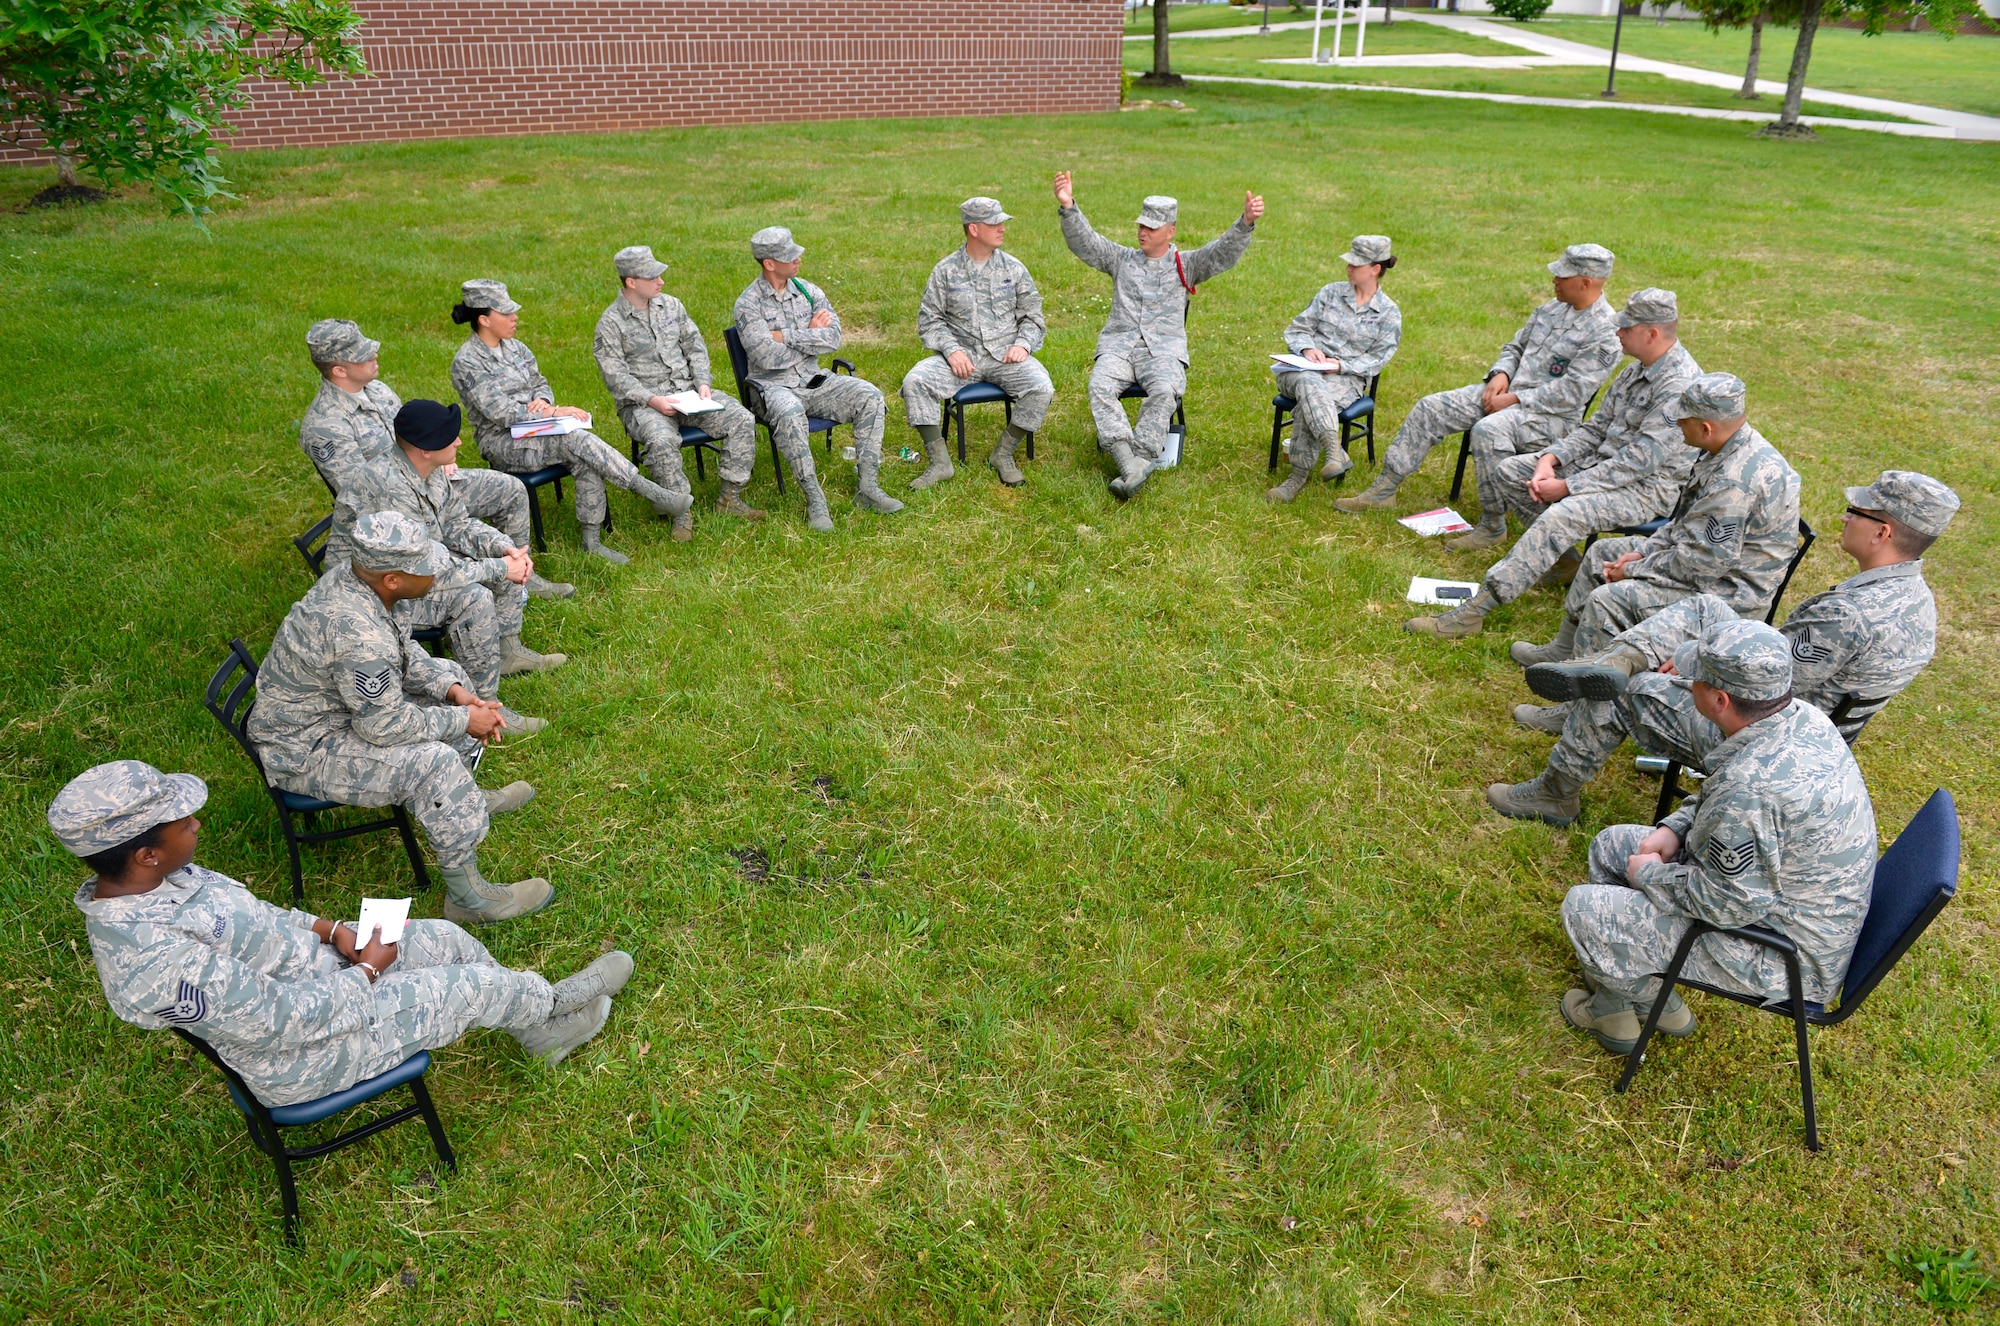 MCGHEE TYSON AIR NATIONAL GUARD BASE, Tenn. - Tech. Sgt. Donald O. Noel, instructor, discusses social media do's and don't's in the military with NCO Academy Class 14-5, B-flight, on the I.G. Brown Training and Education Center campus here, May 9, 2014. (U.S. Air National Guard photo by Master Sgt. Kurt Skoglund/Released)